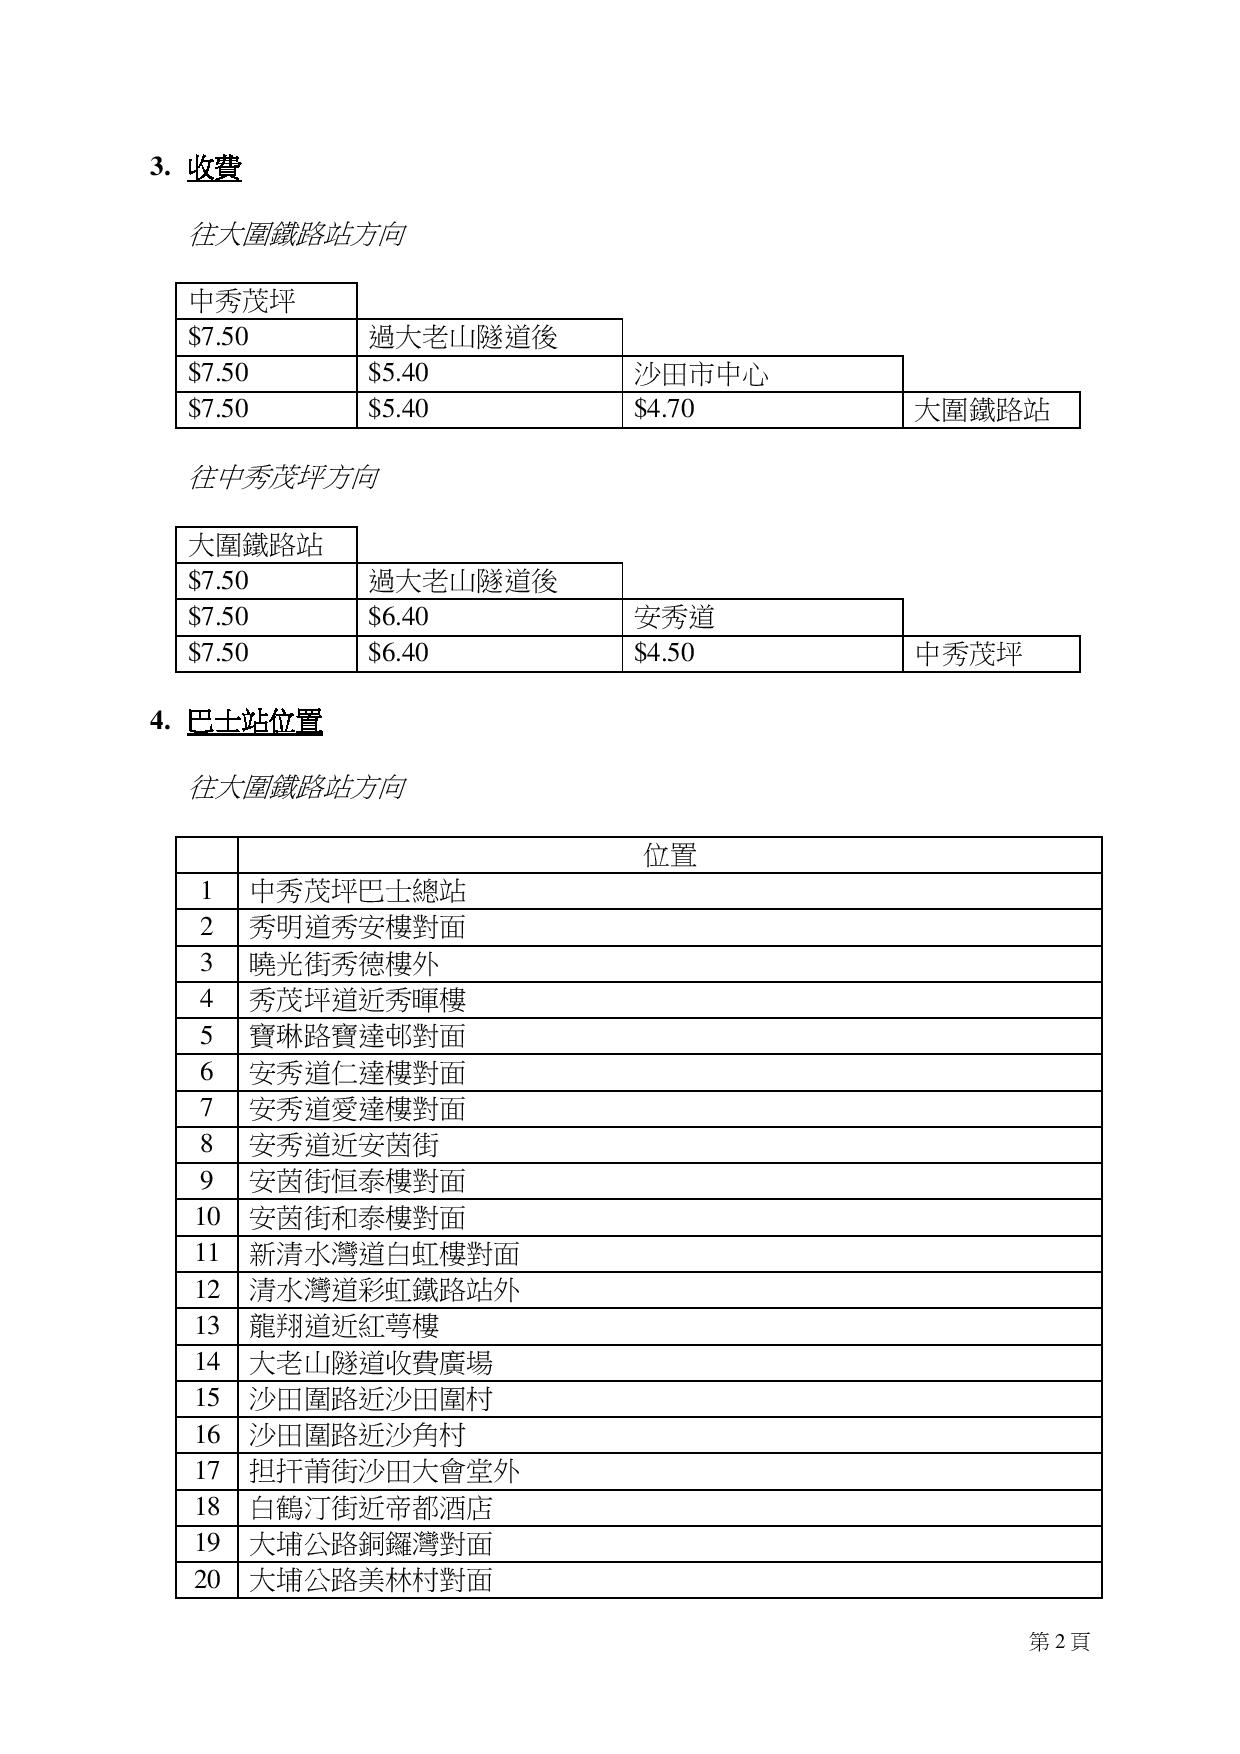 2017-07-05 kmb 88 introduction traffic advice chi-page-002.jpg